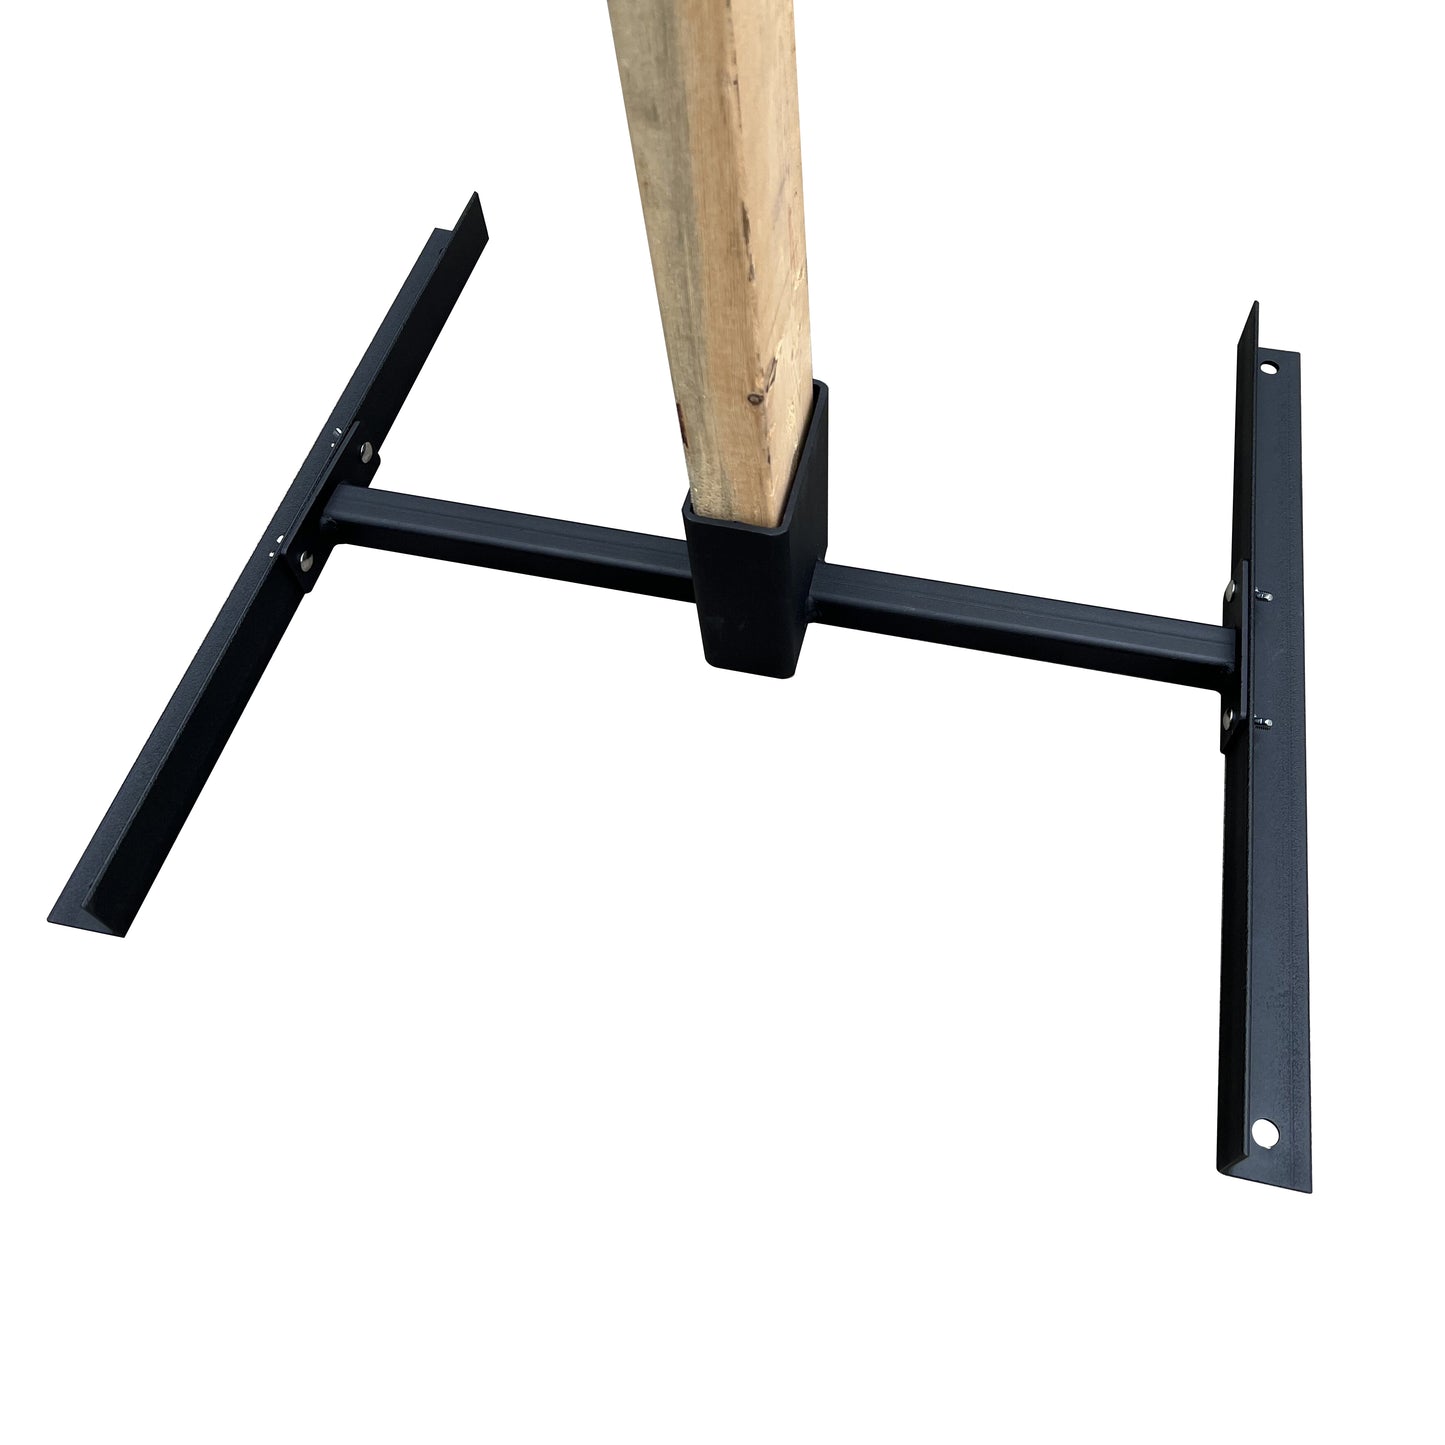 2x4 Nested Steel Shooting Target Stand